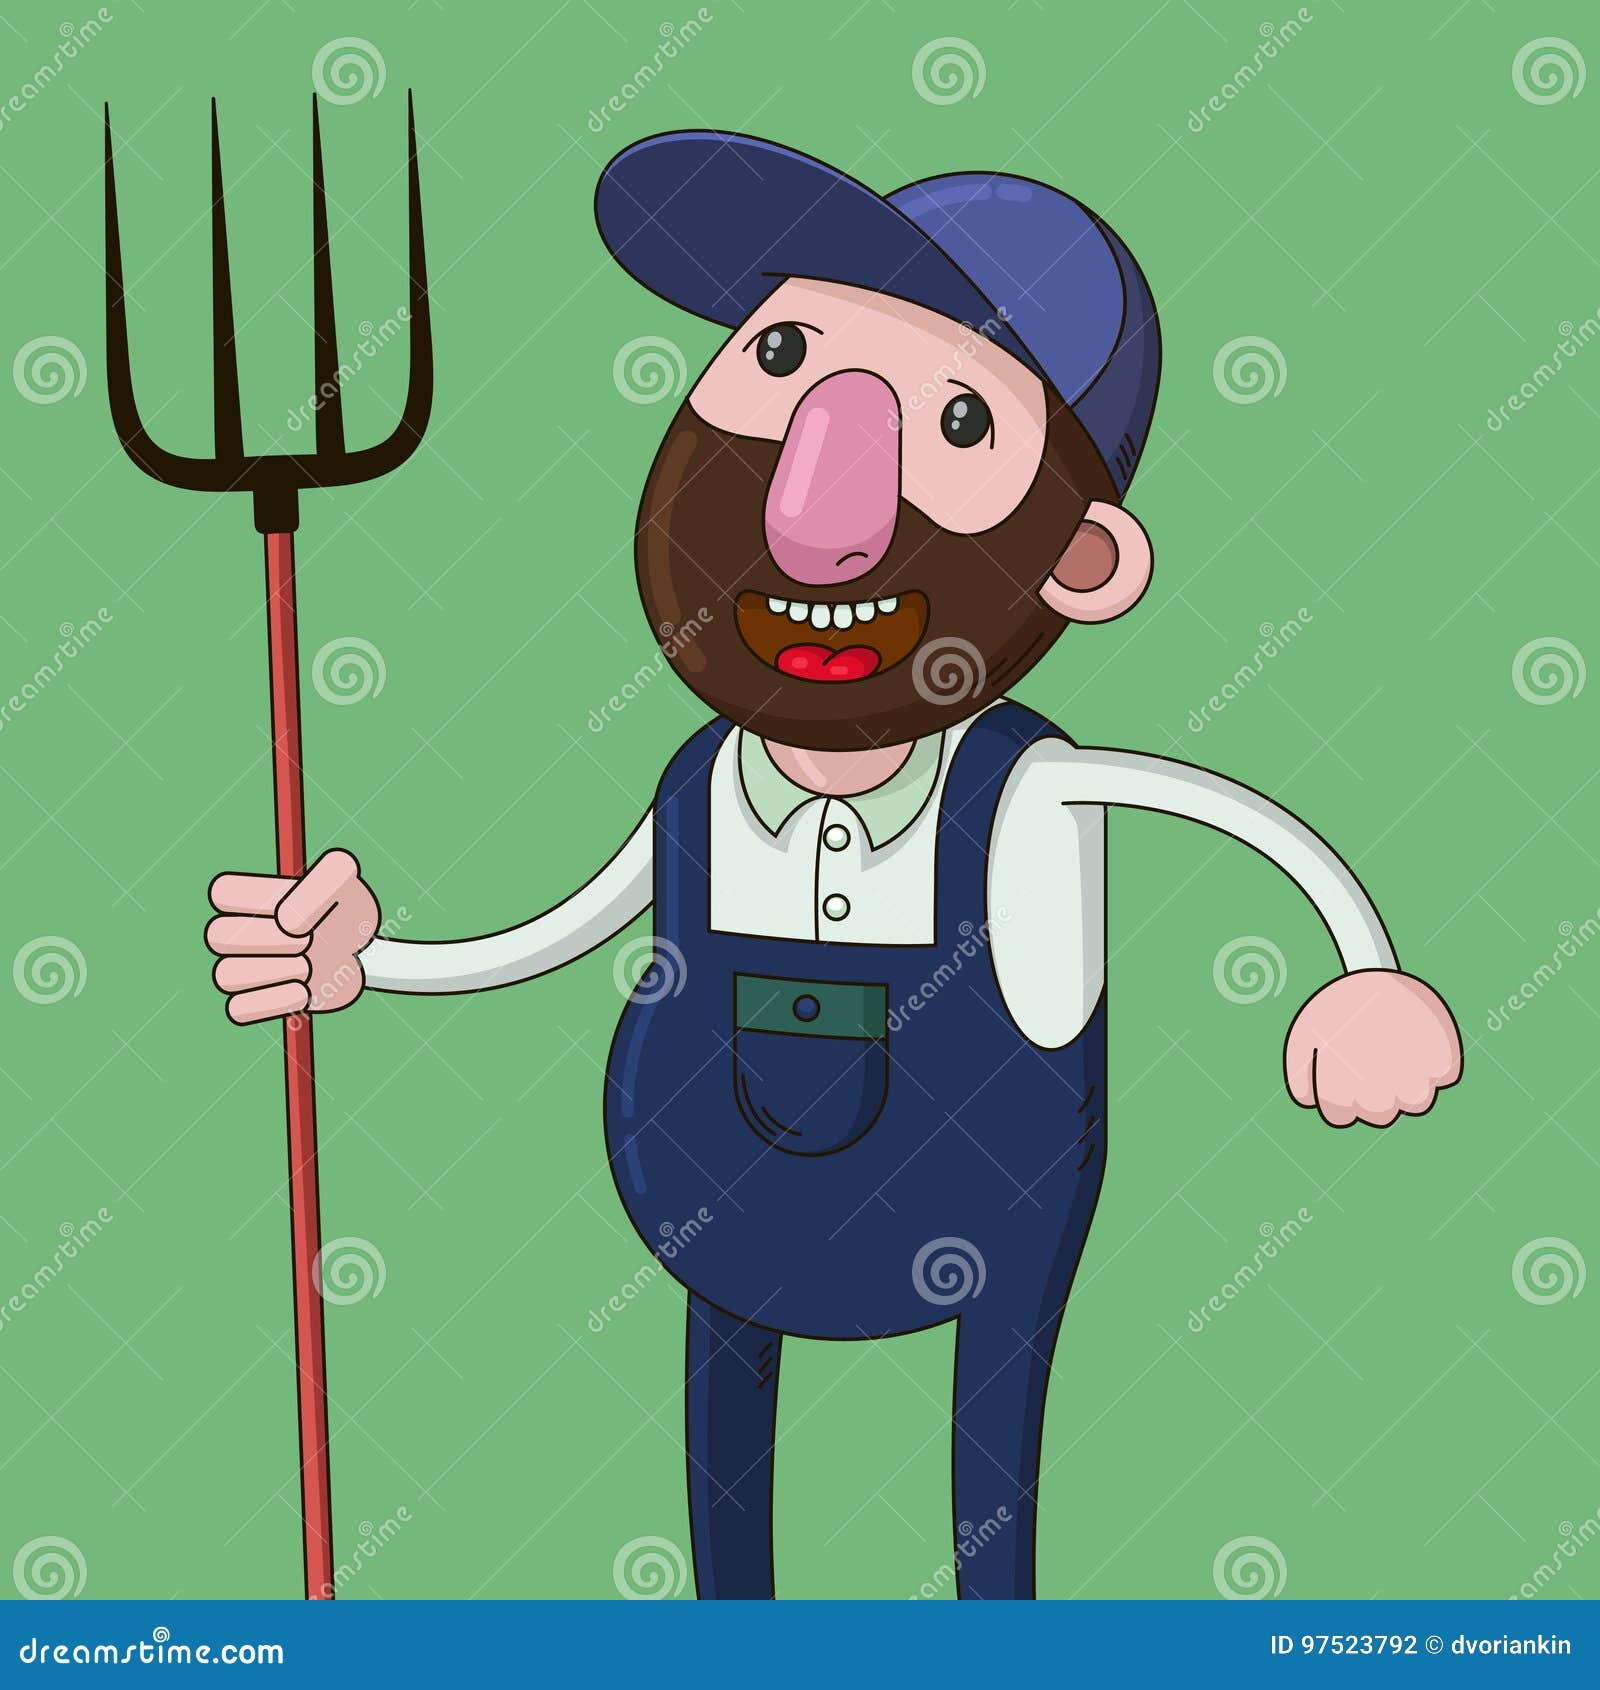 Farmer with pitchfork stock vector. Illustration of agriculture - 97523792